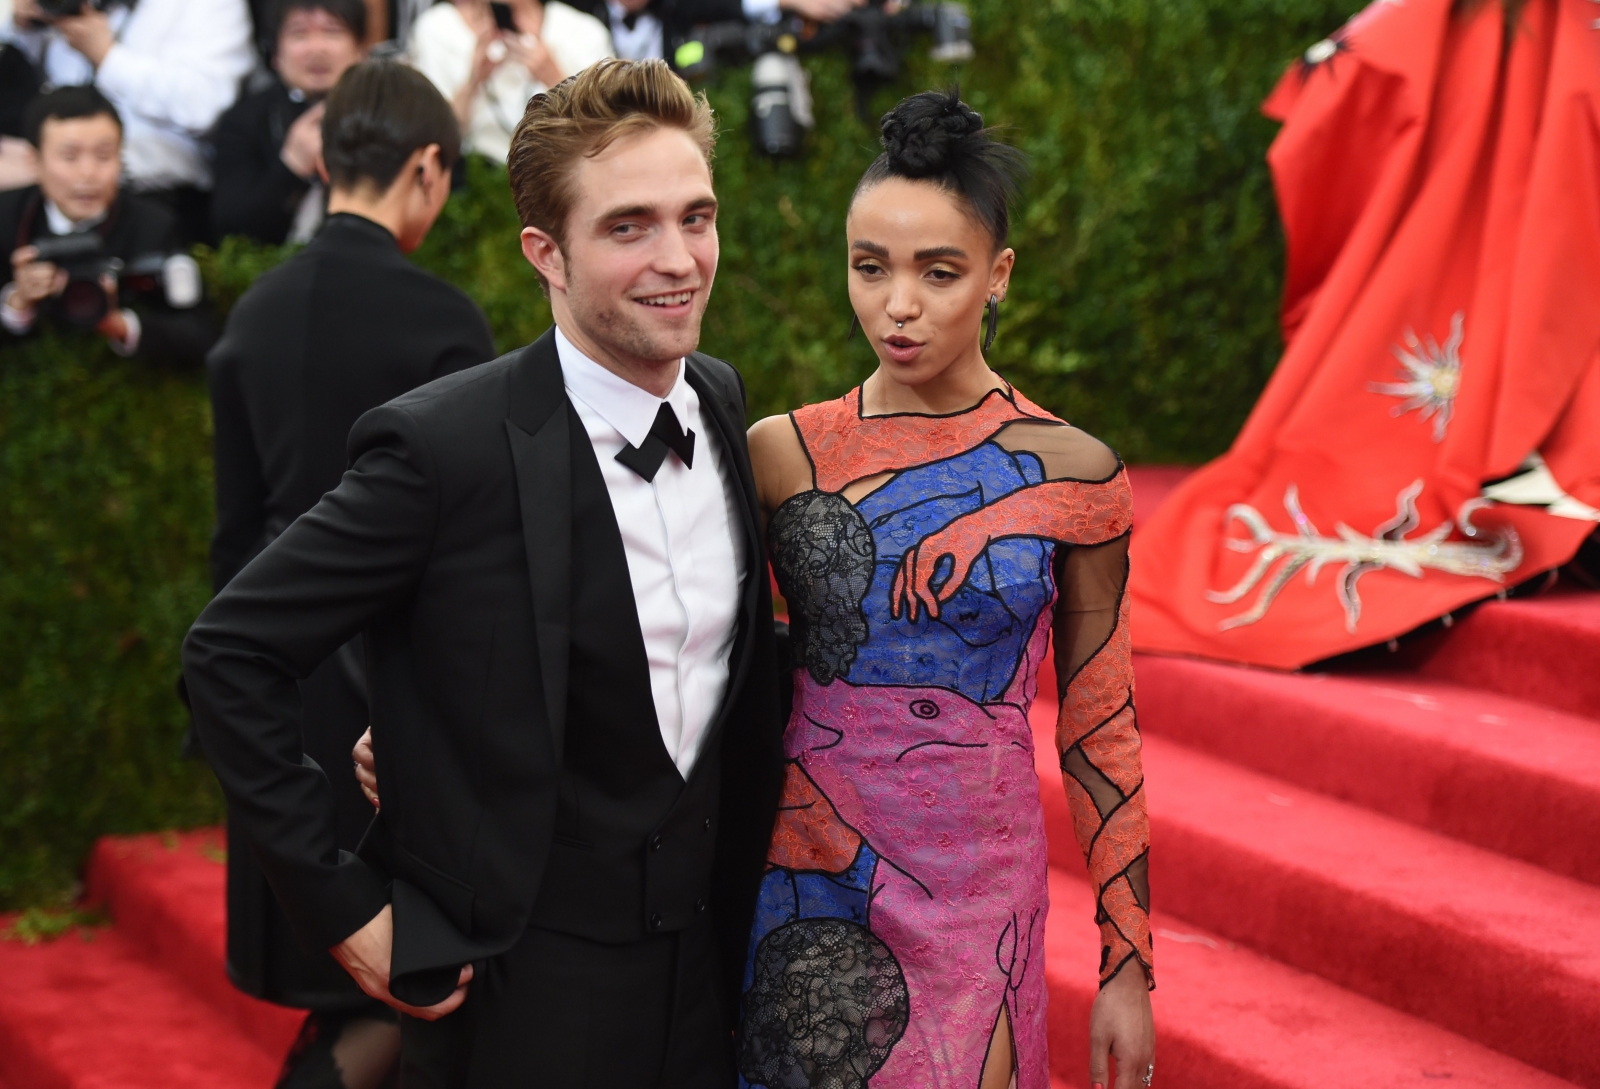 Robert Pattinson and FKA Twigs are not planning a private oceanside wedding despite report - International Business Times UK